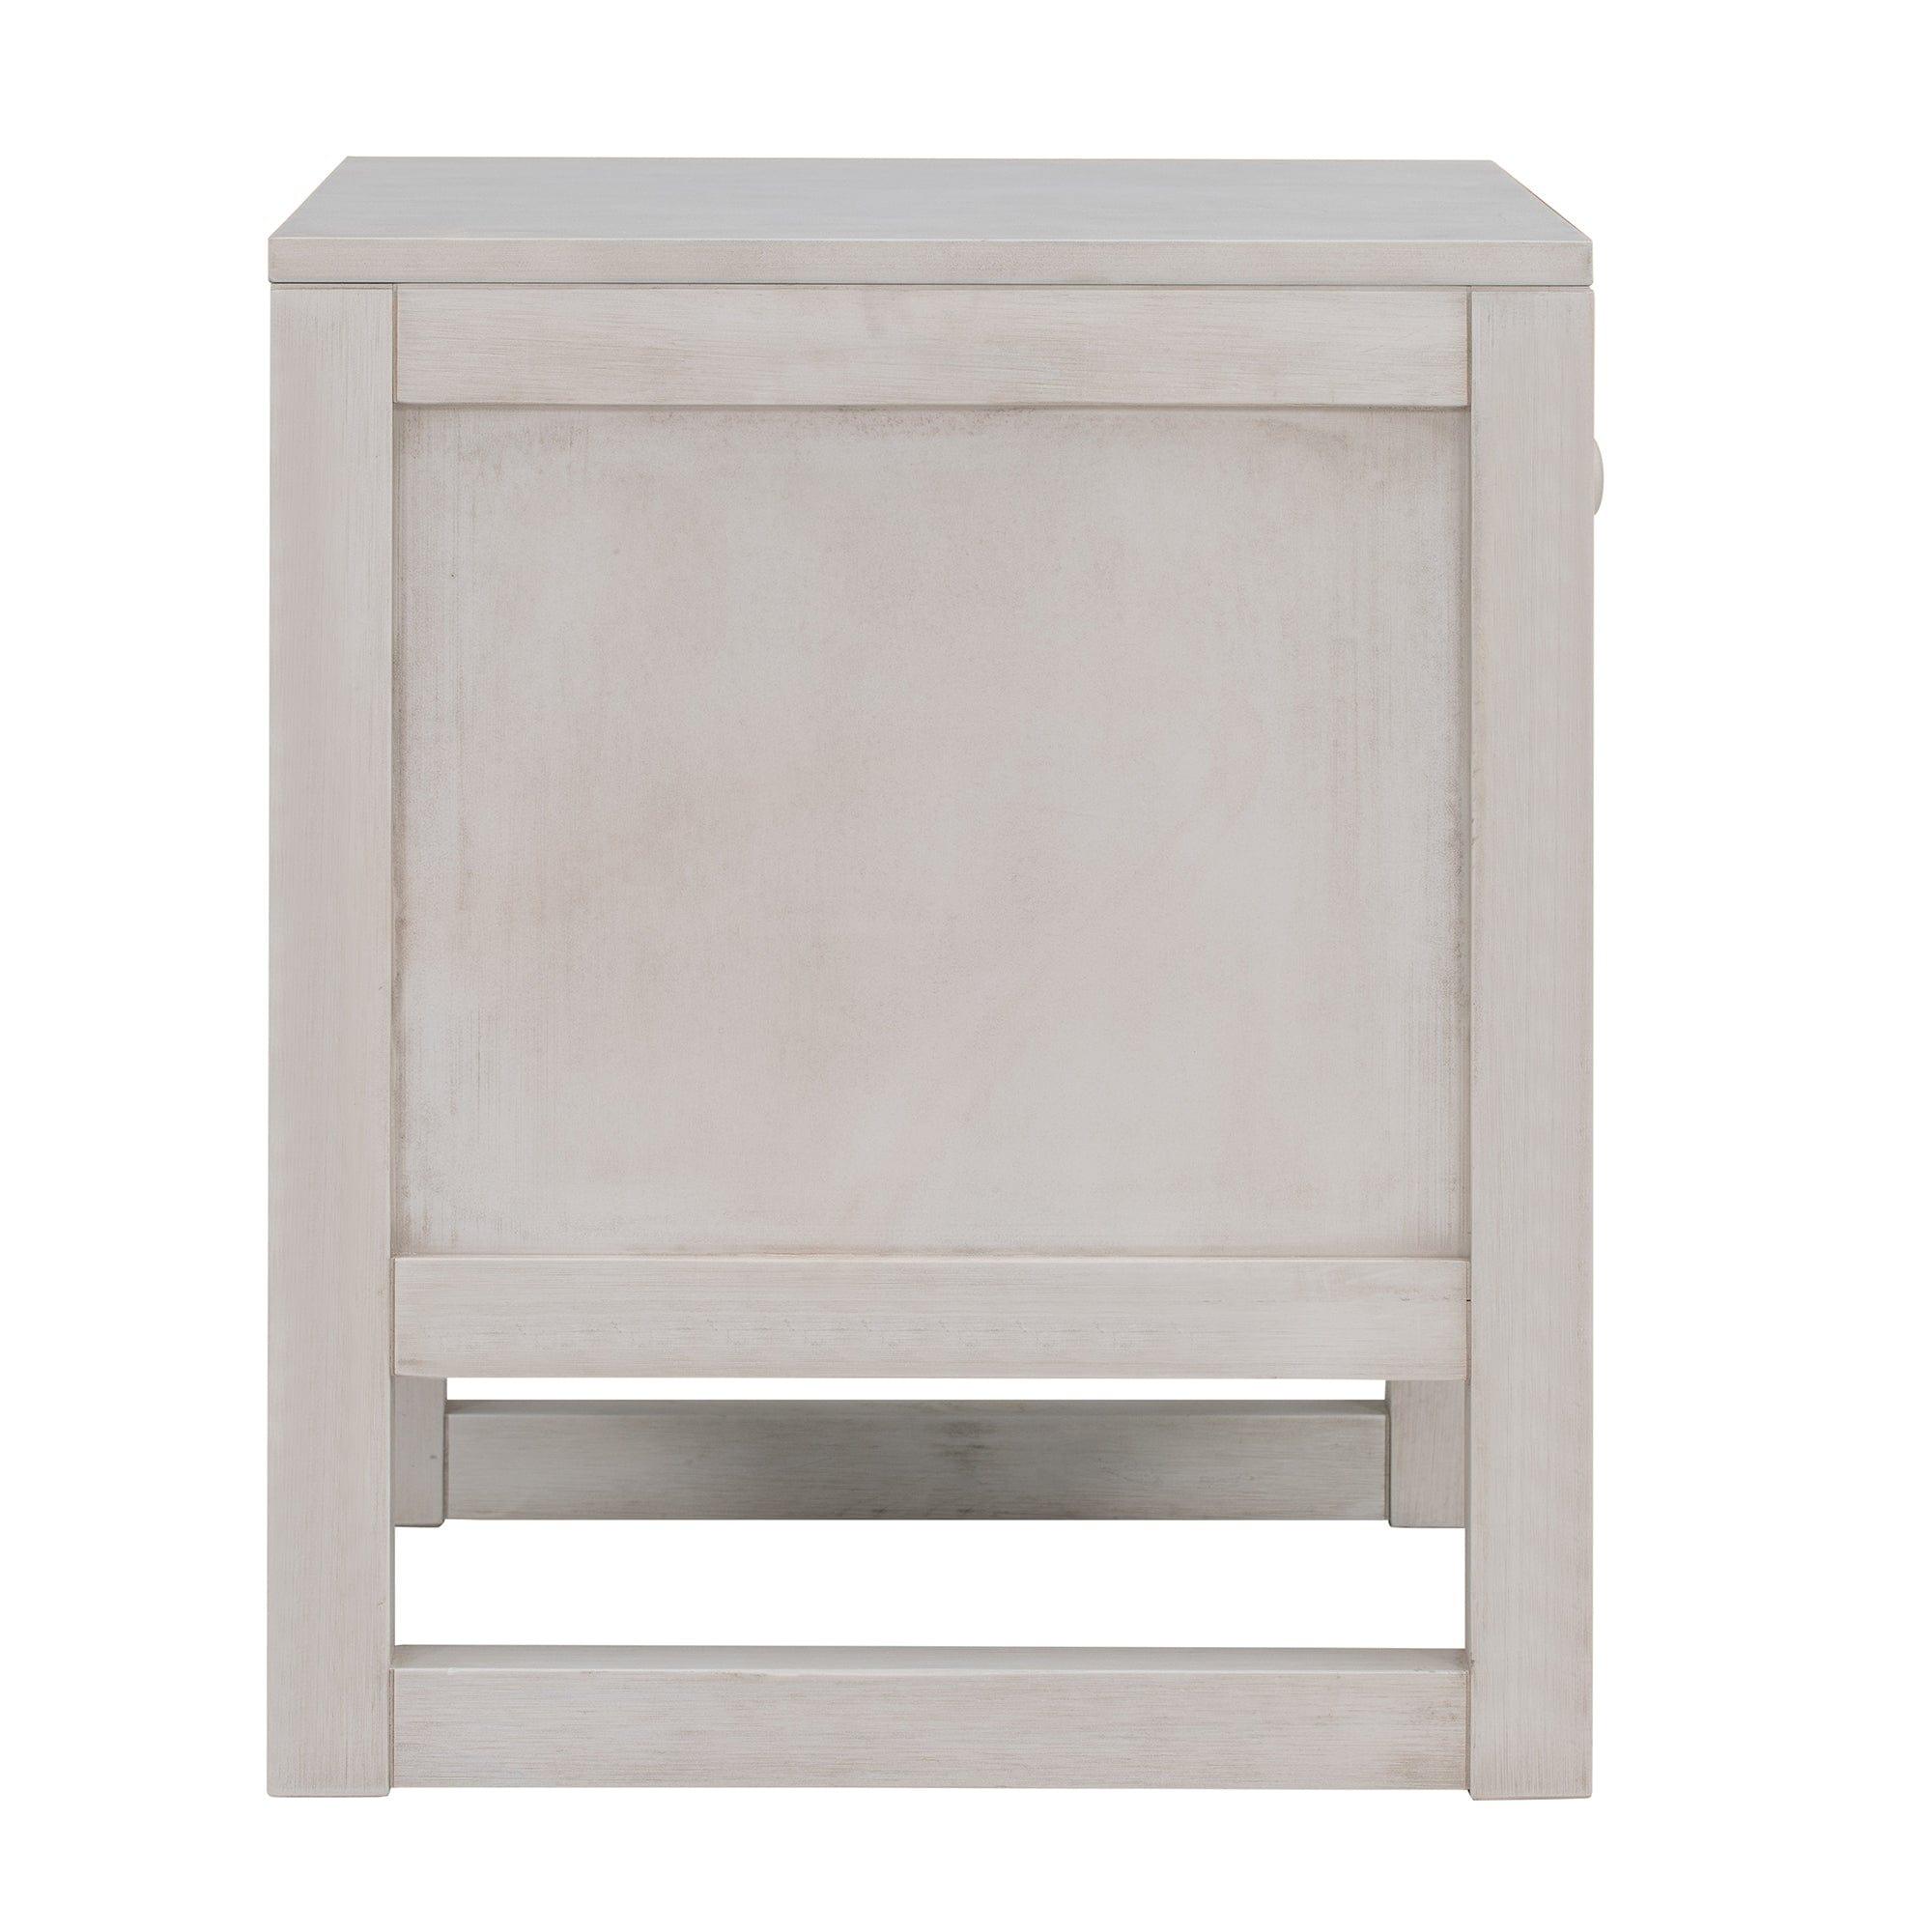 Shop Wooden Nightstand with a Drawer and an Open Storage,End Table for Bedroom,Anitque White Mademoiselle Home Decor